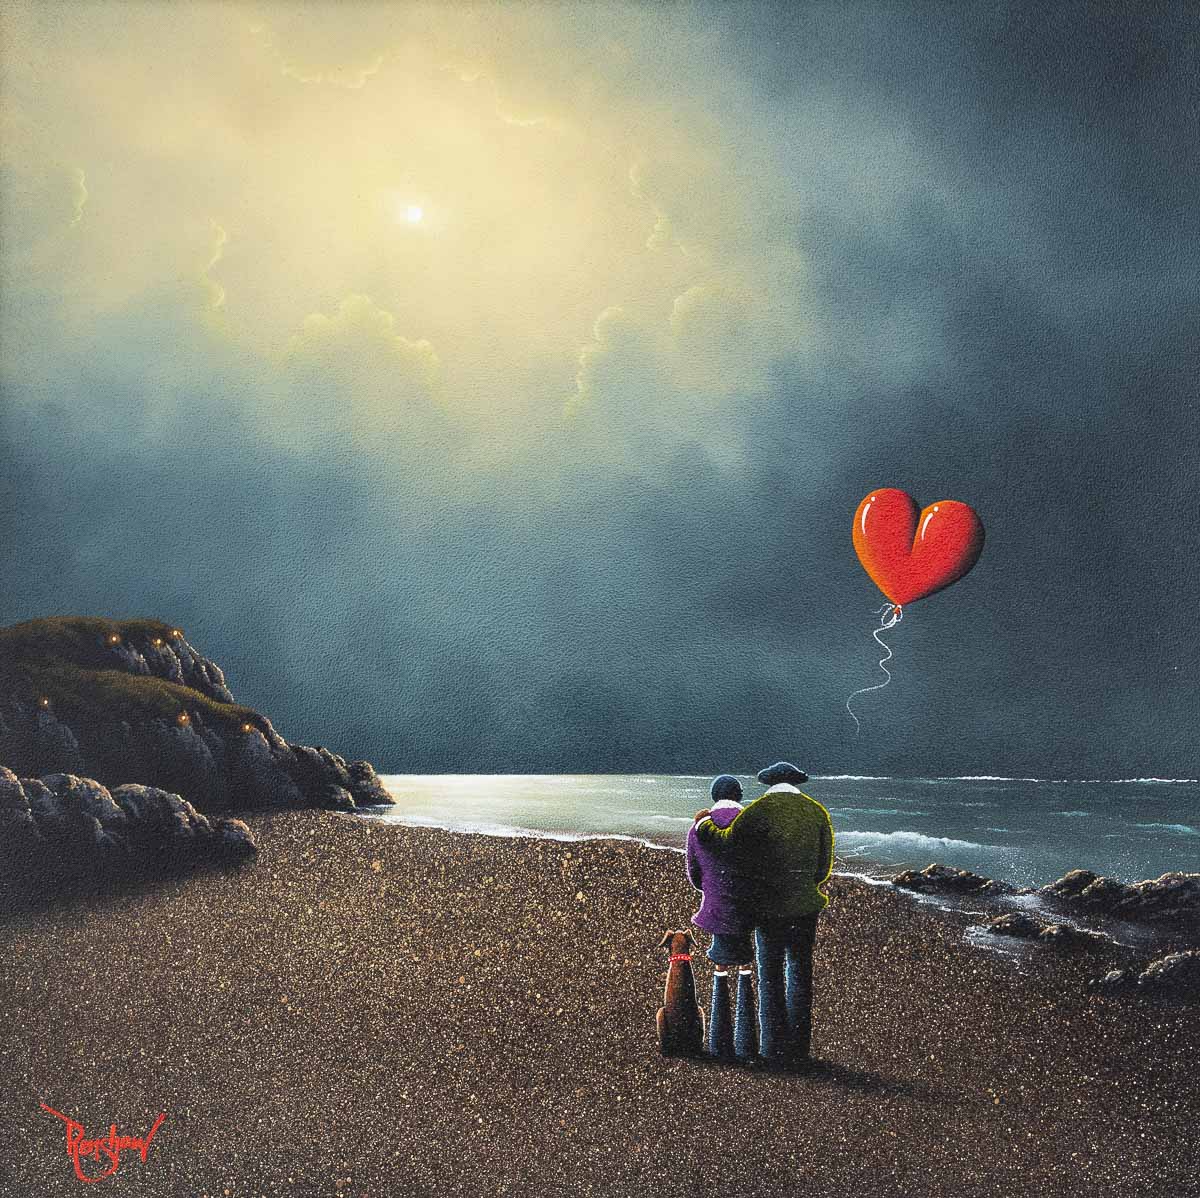 I'll Always Be By Your Side - Original - HOLD BACK FOR DR SHOW David Renshaw Original